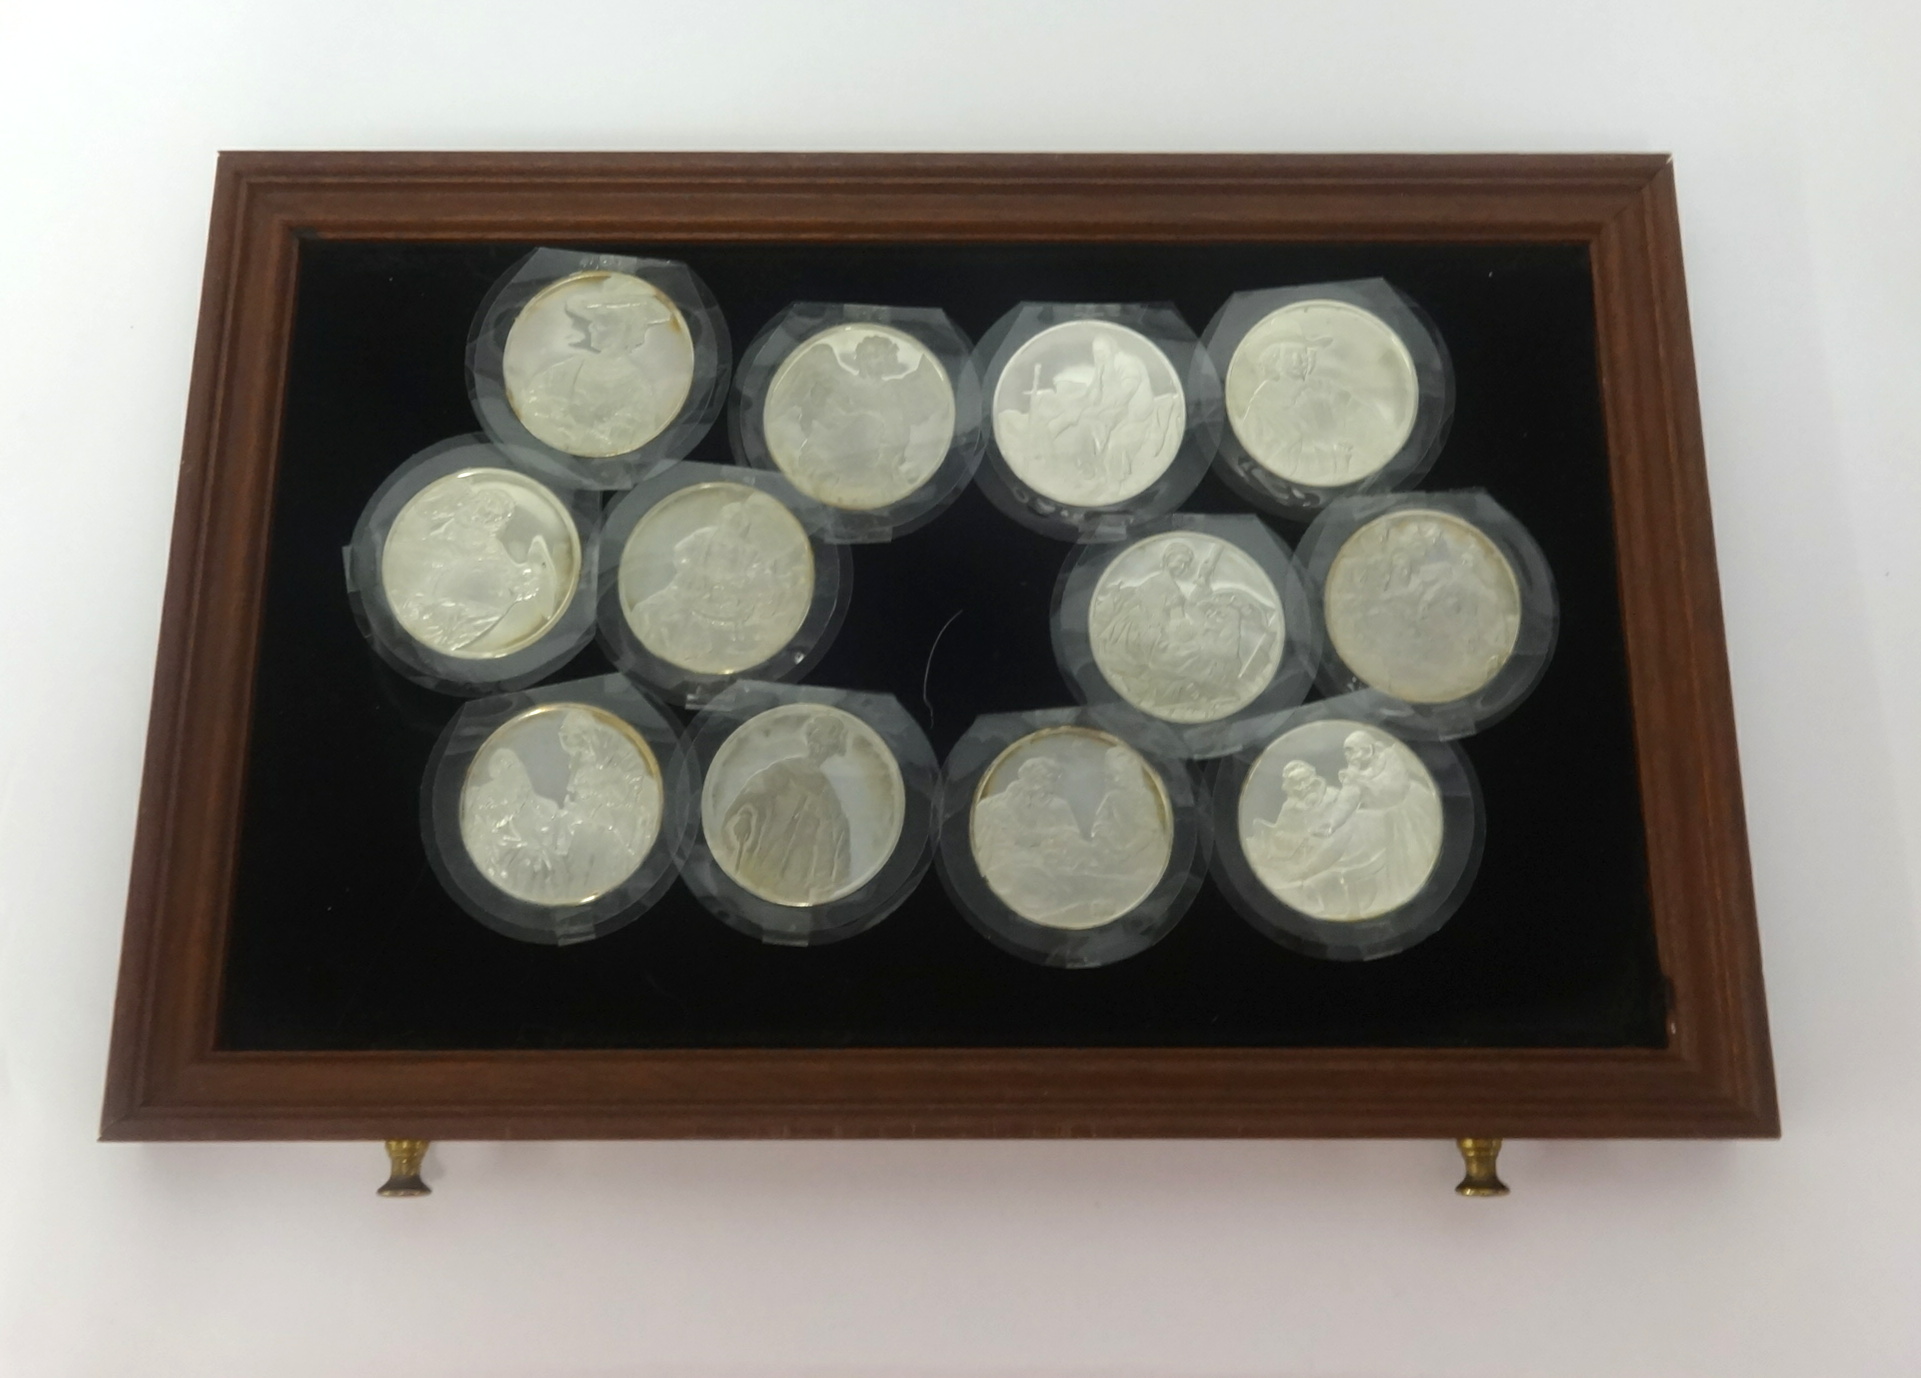 A collection of Sterling silver proof medals 'The Genius of Rembrandt' produced by John Pinches, - Image 3 of 4